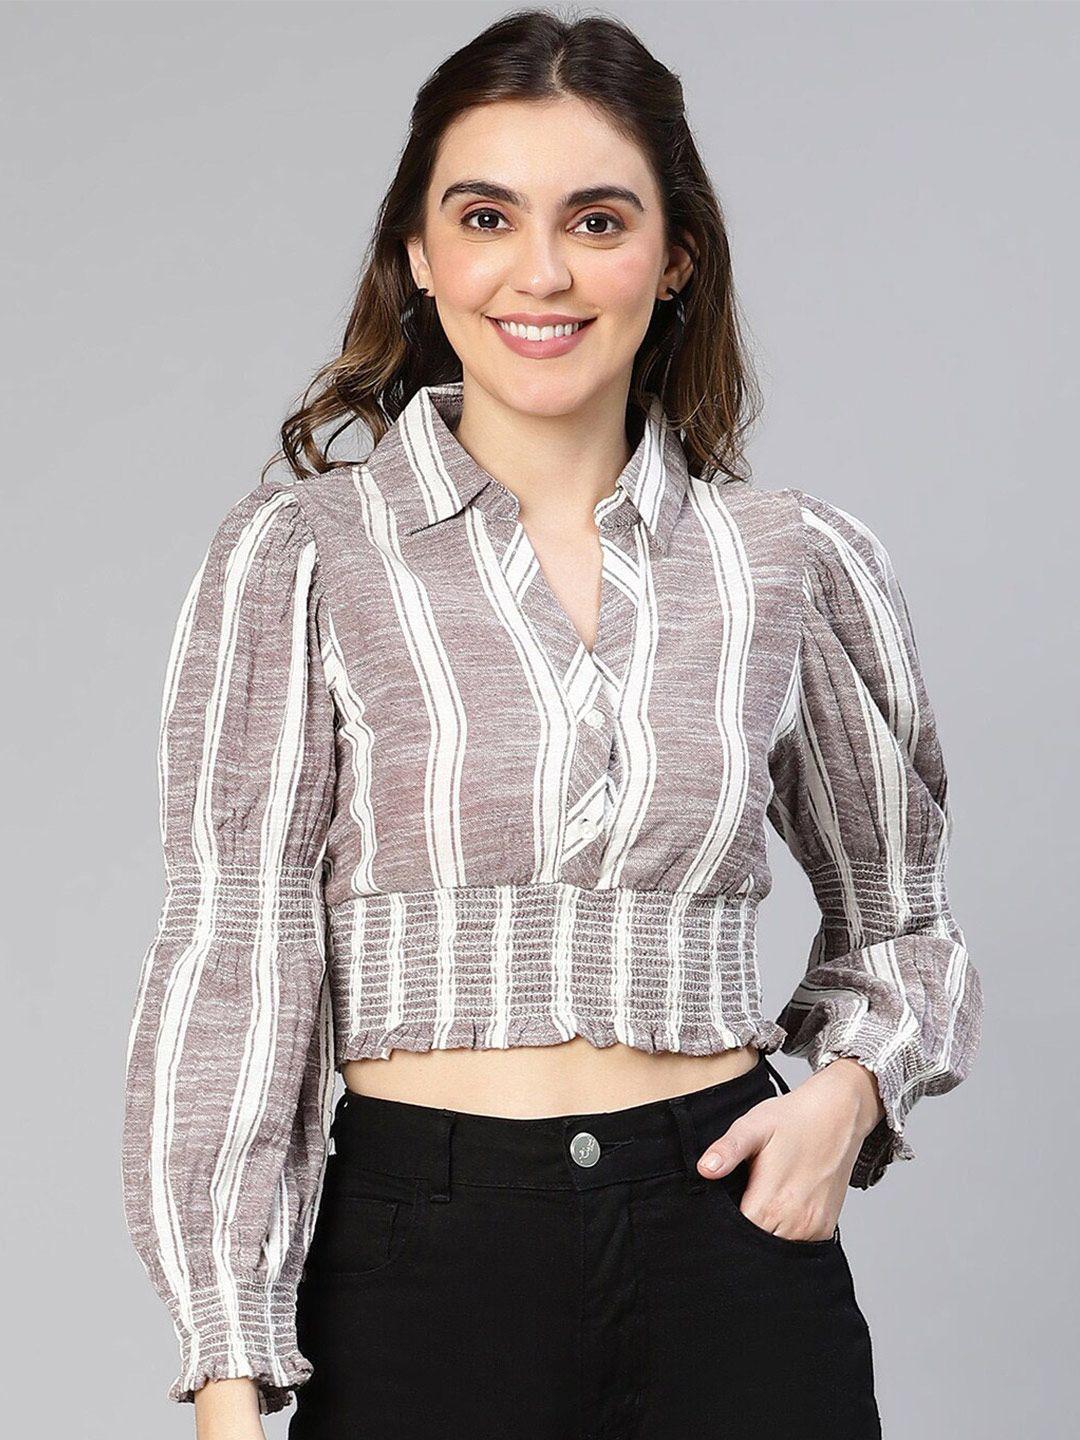 oxolloxo striped smocked puff sleeves organic cotton shirt style crop top